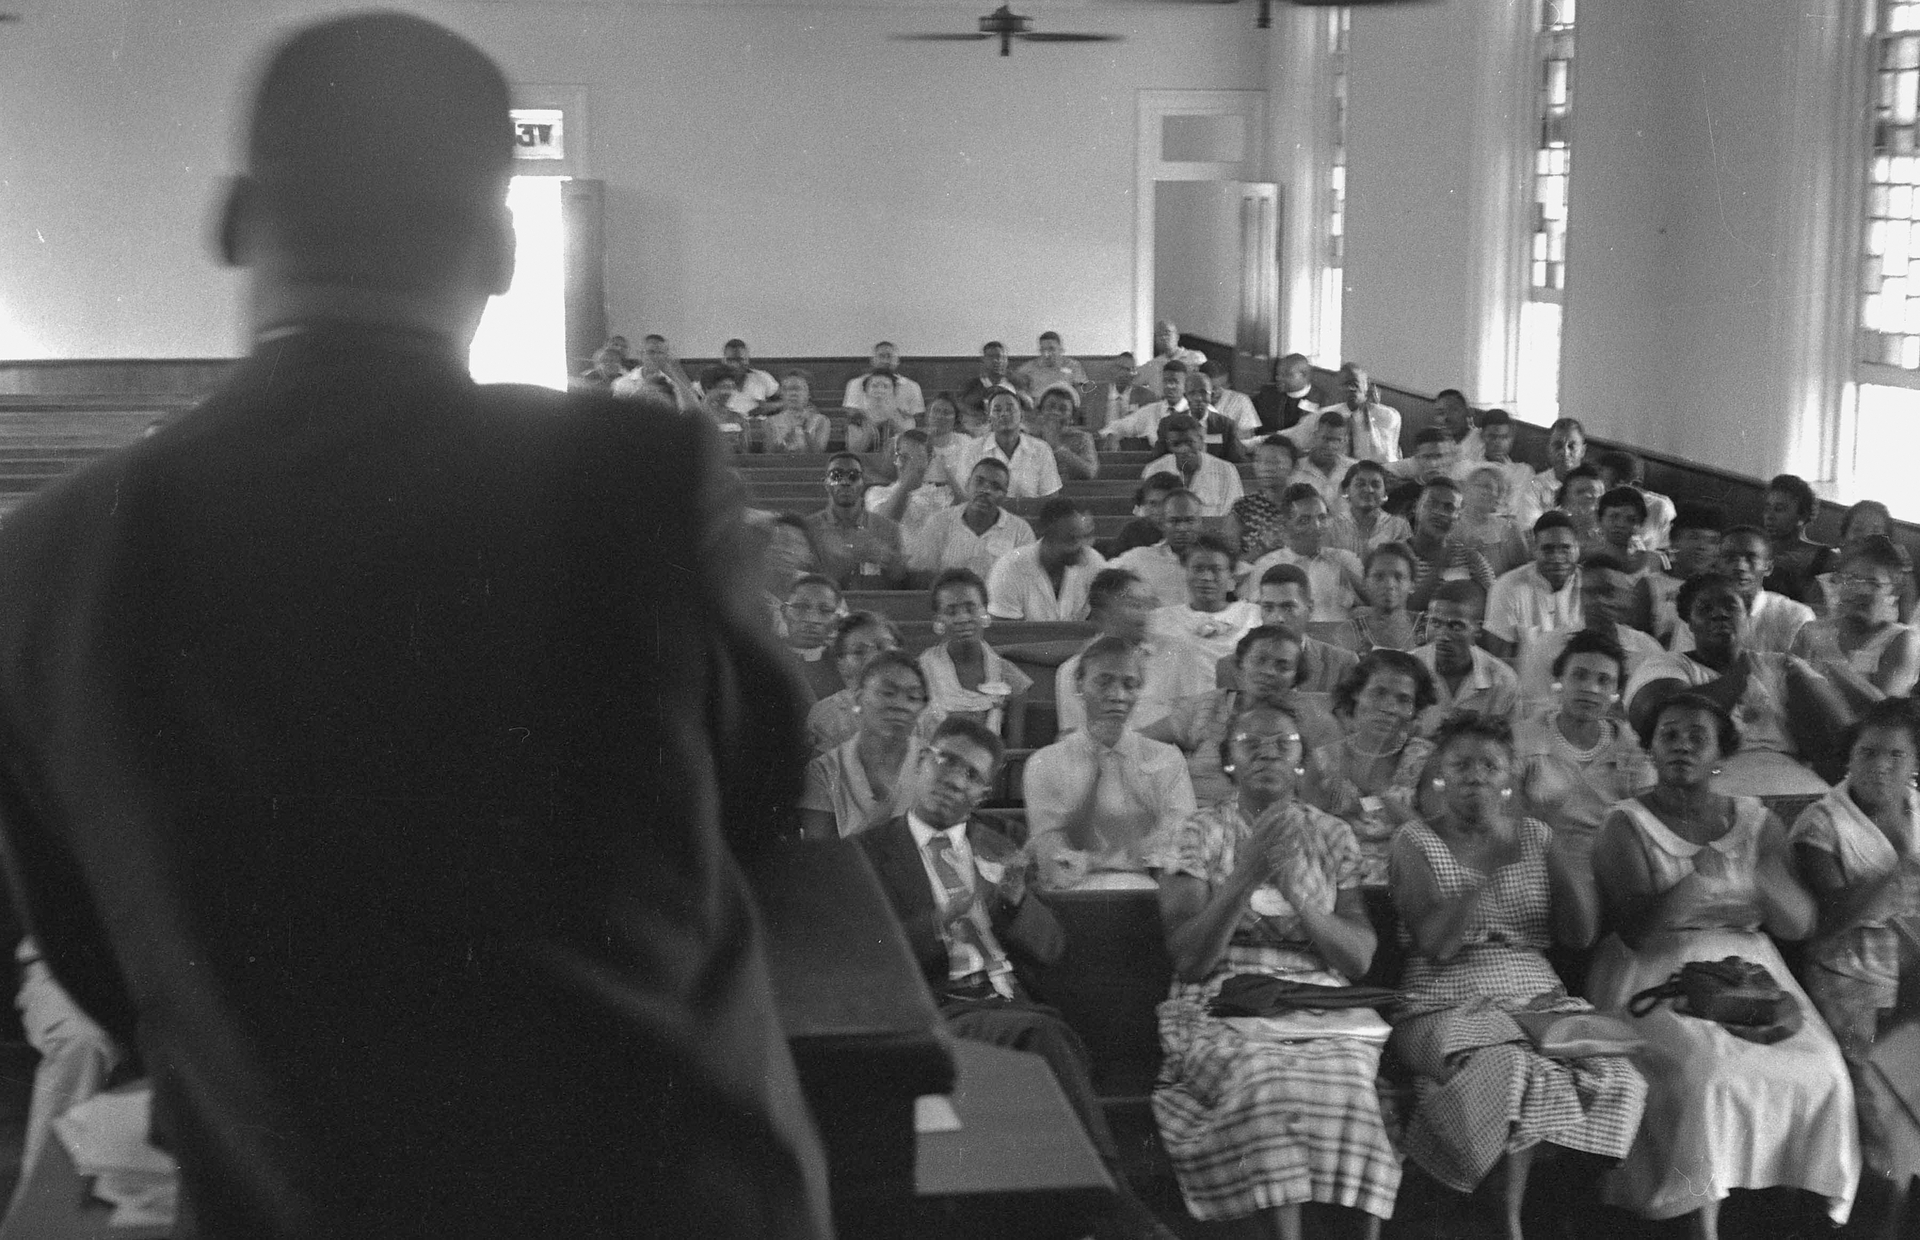 Black and white image of Martin Luther King Jr. with his back to the camera, and standing at a church pulpit speaking to a congregation of churchgoers sitting on church pews.